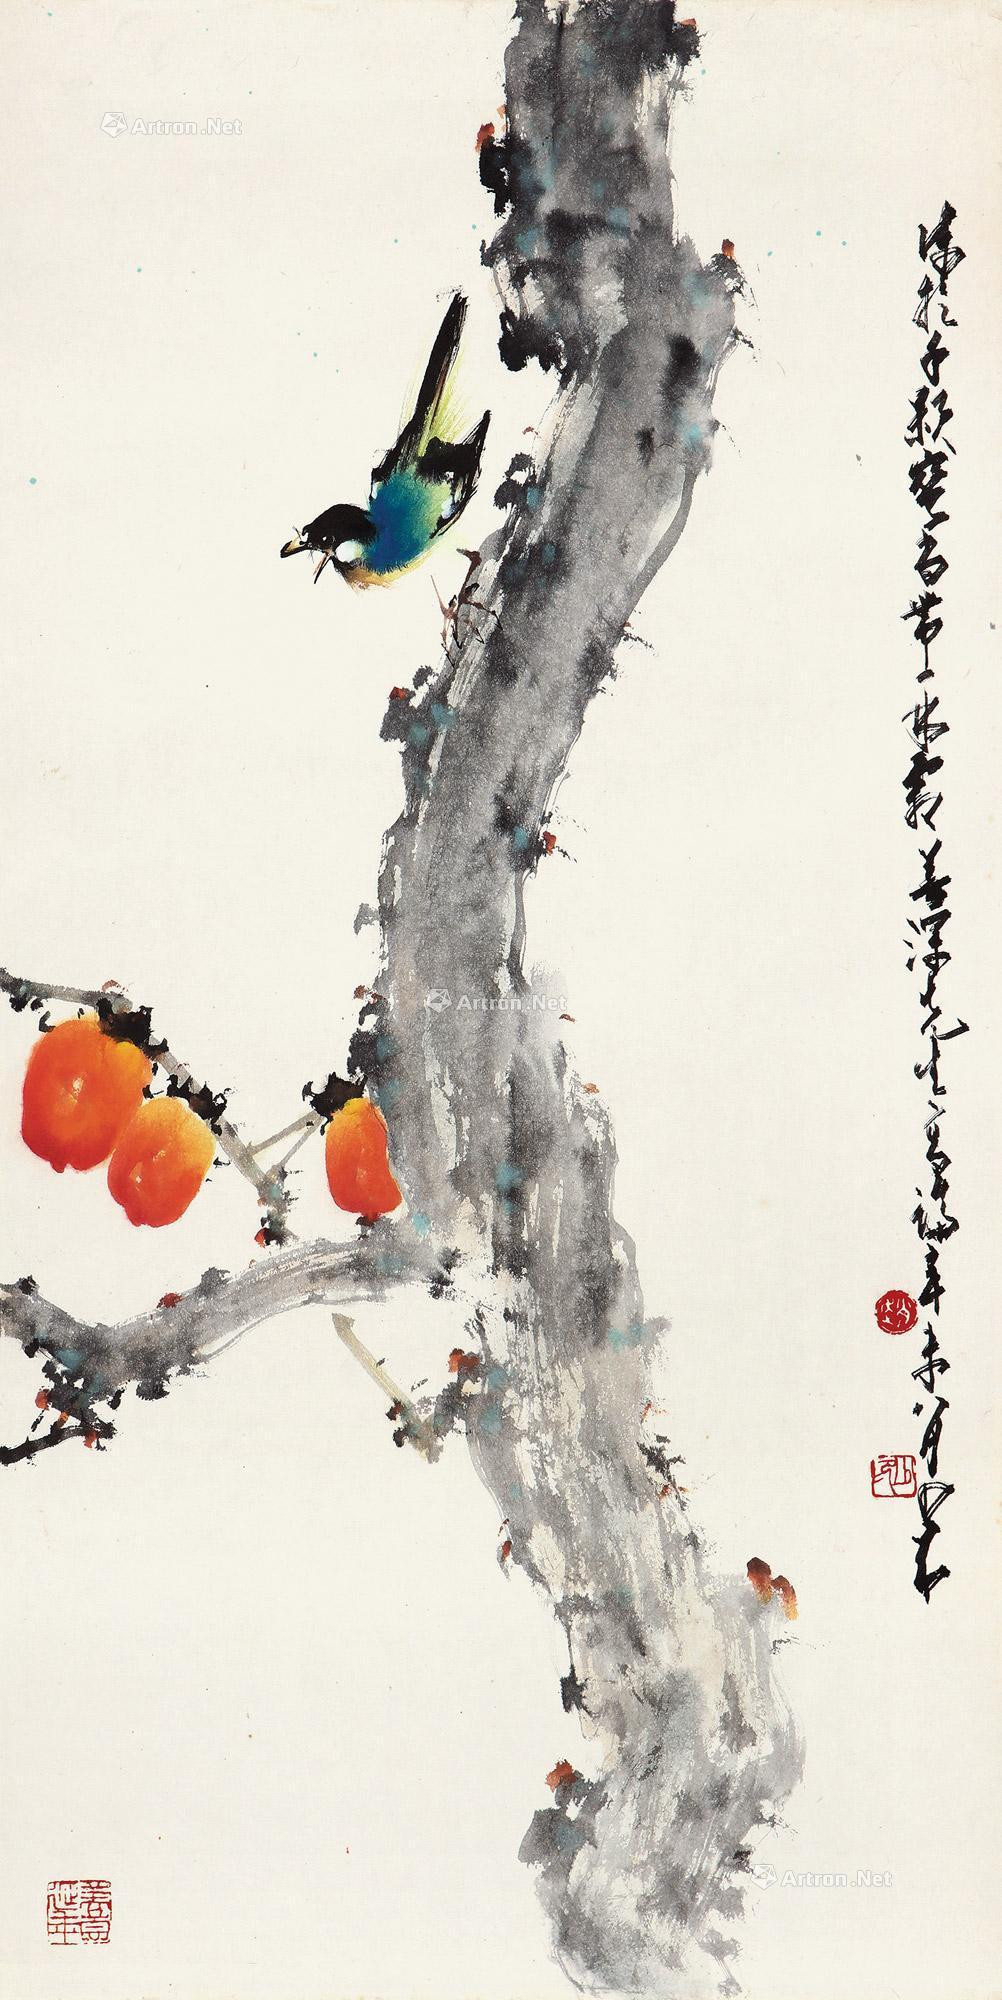 Bird and Persimmons